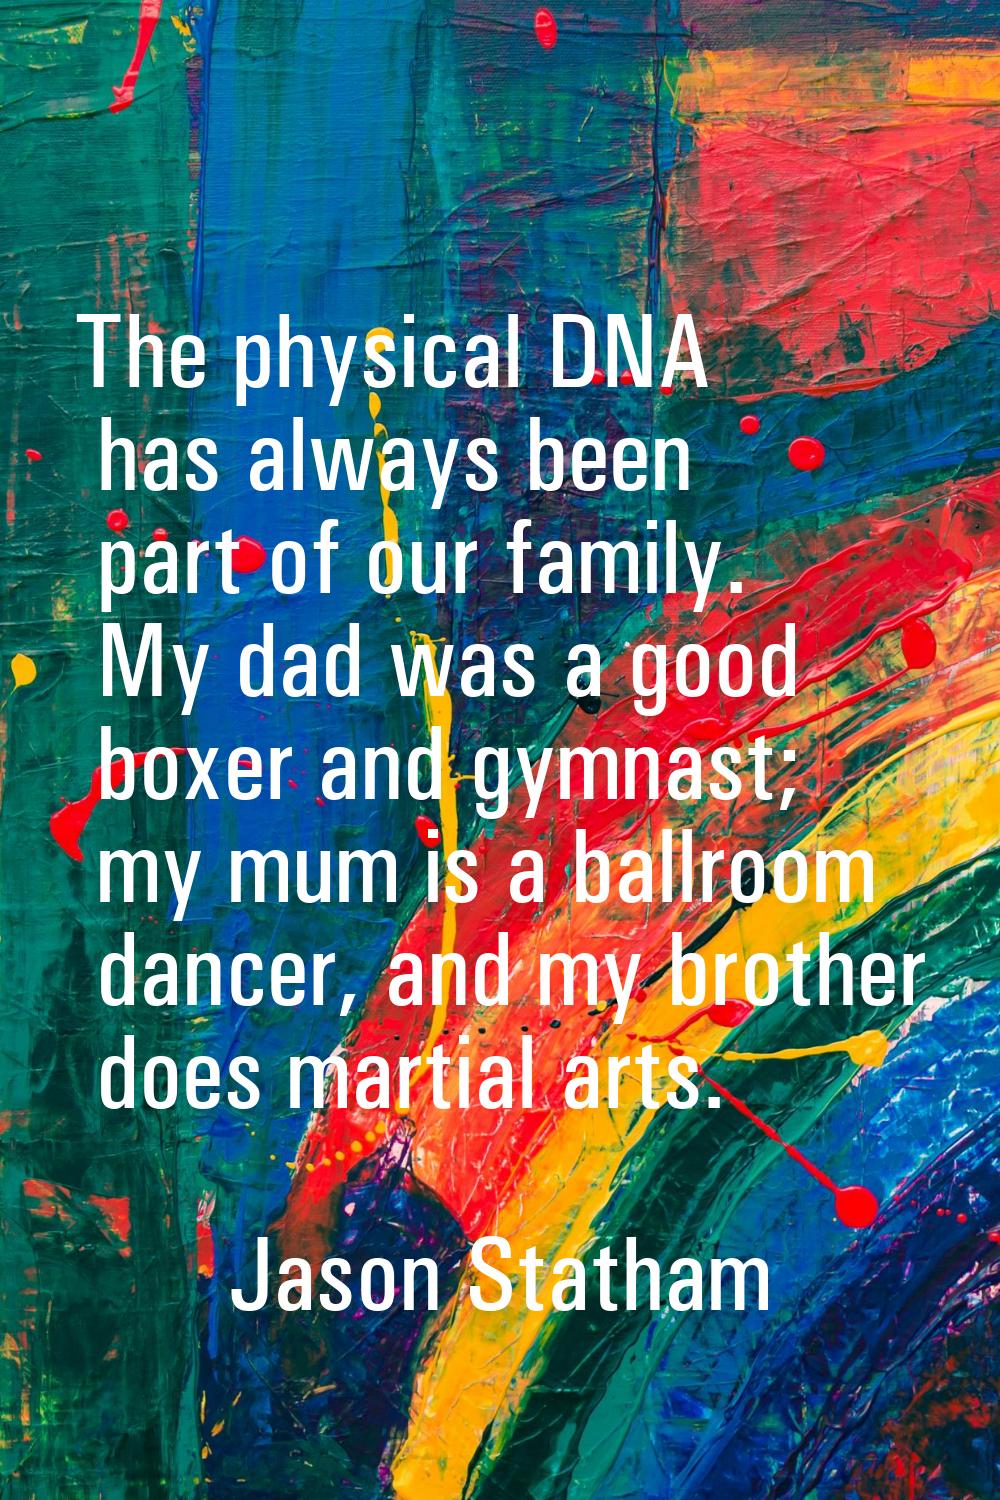 The physical DNA has always been part of our family. My dad was a good boxer and gymnast; my mum is